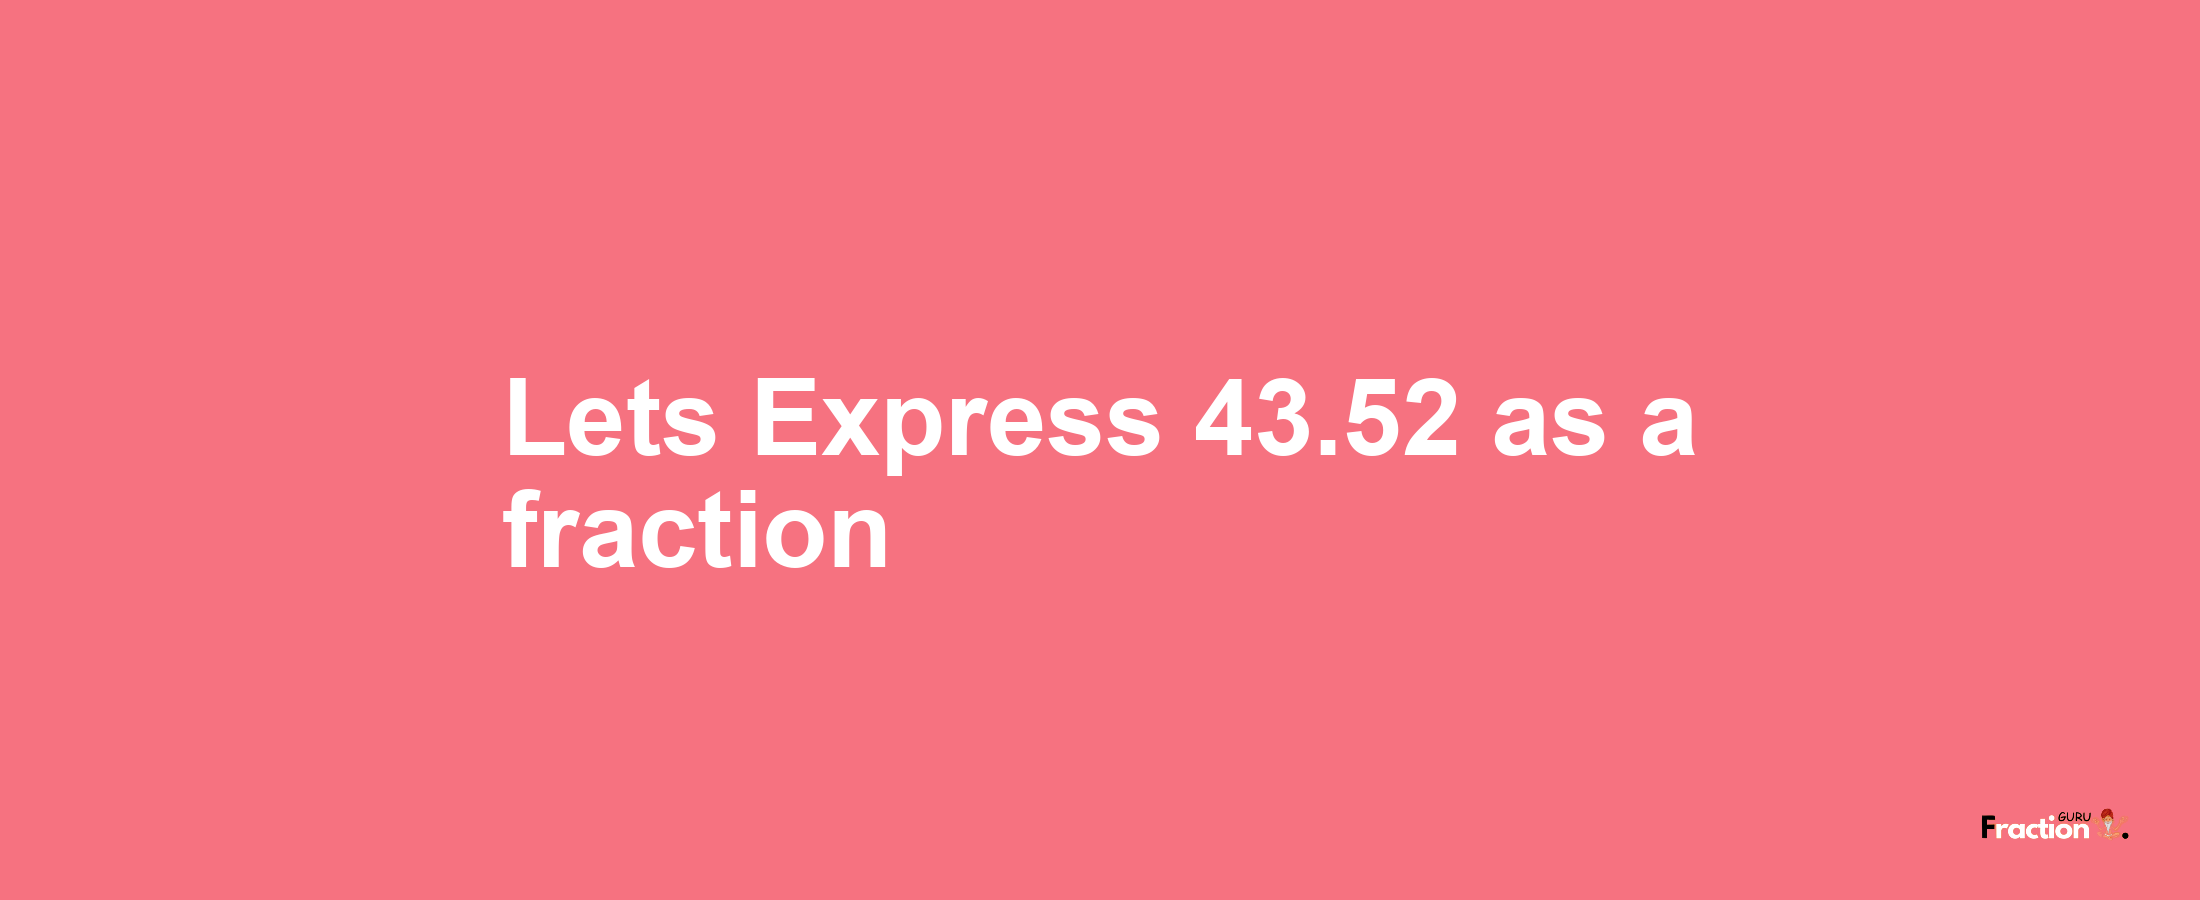 Lets Express 43.52 as afraction